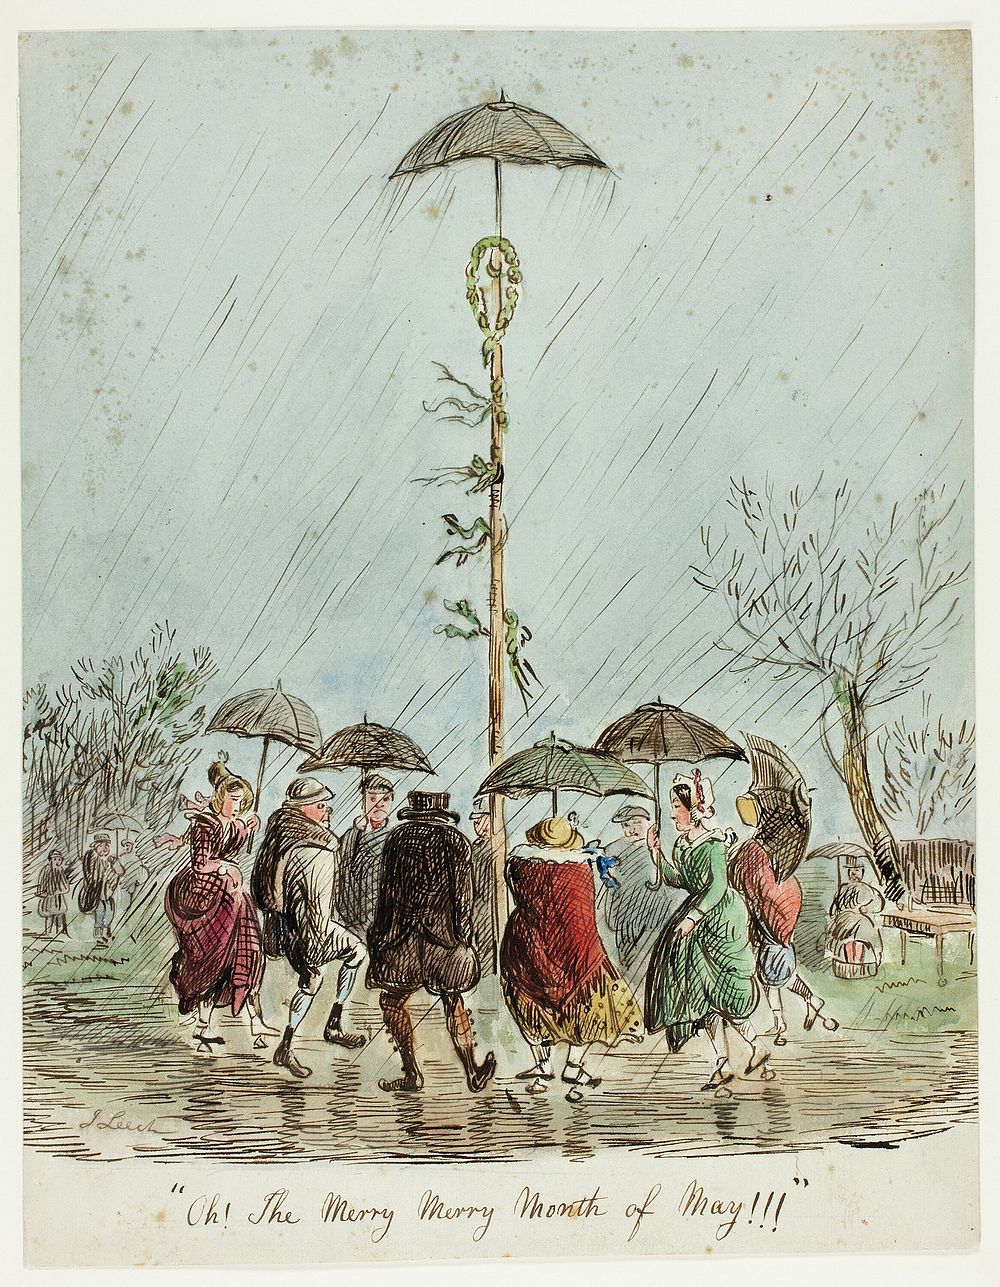 Oh! The Merry, Merry Month of May!!! by John Leech